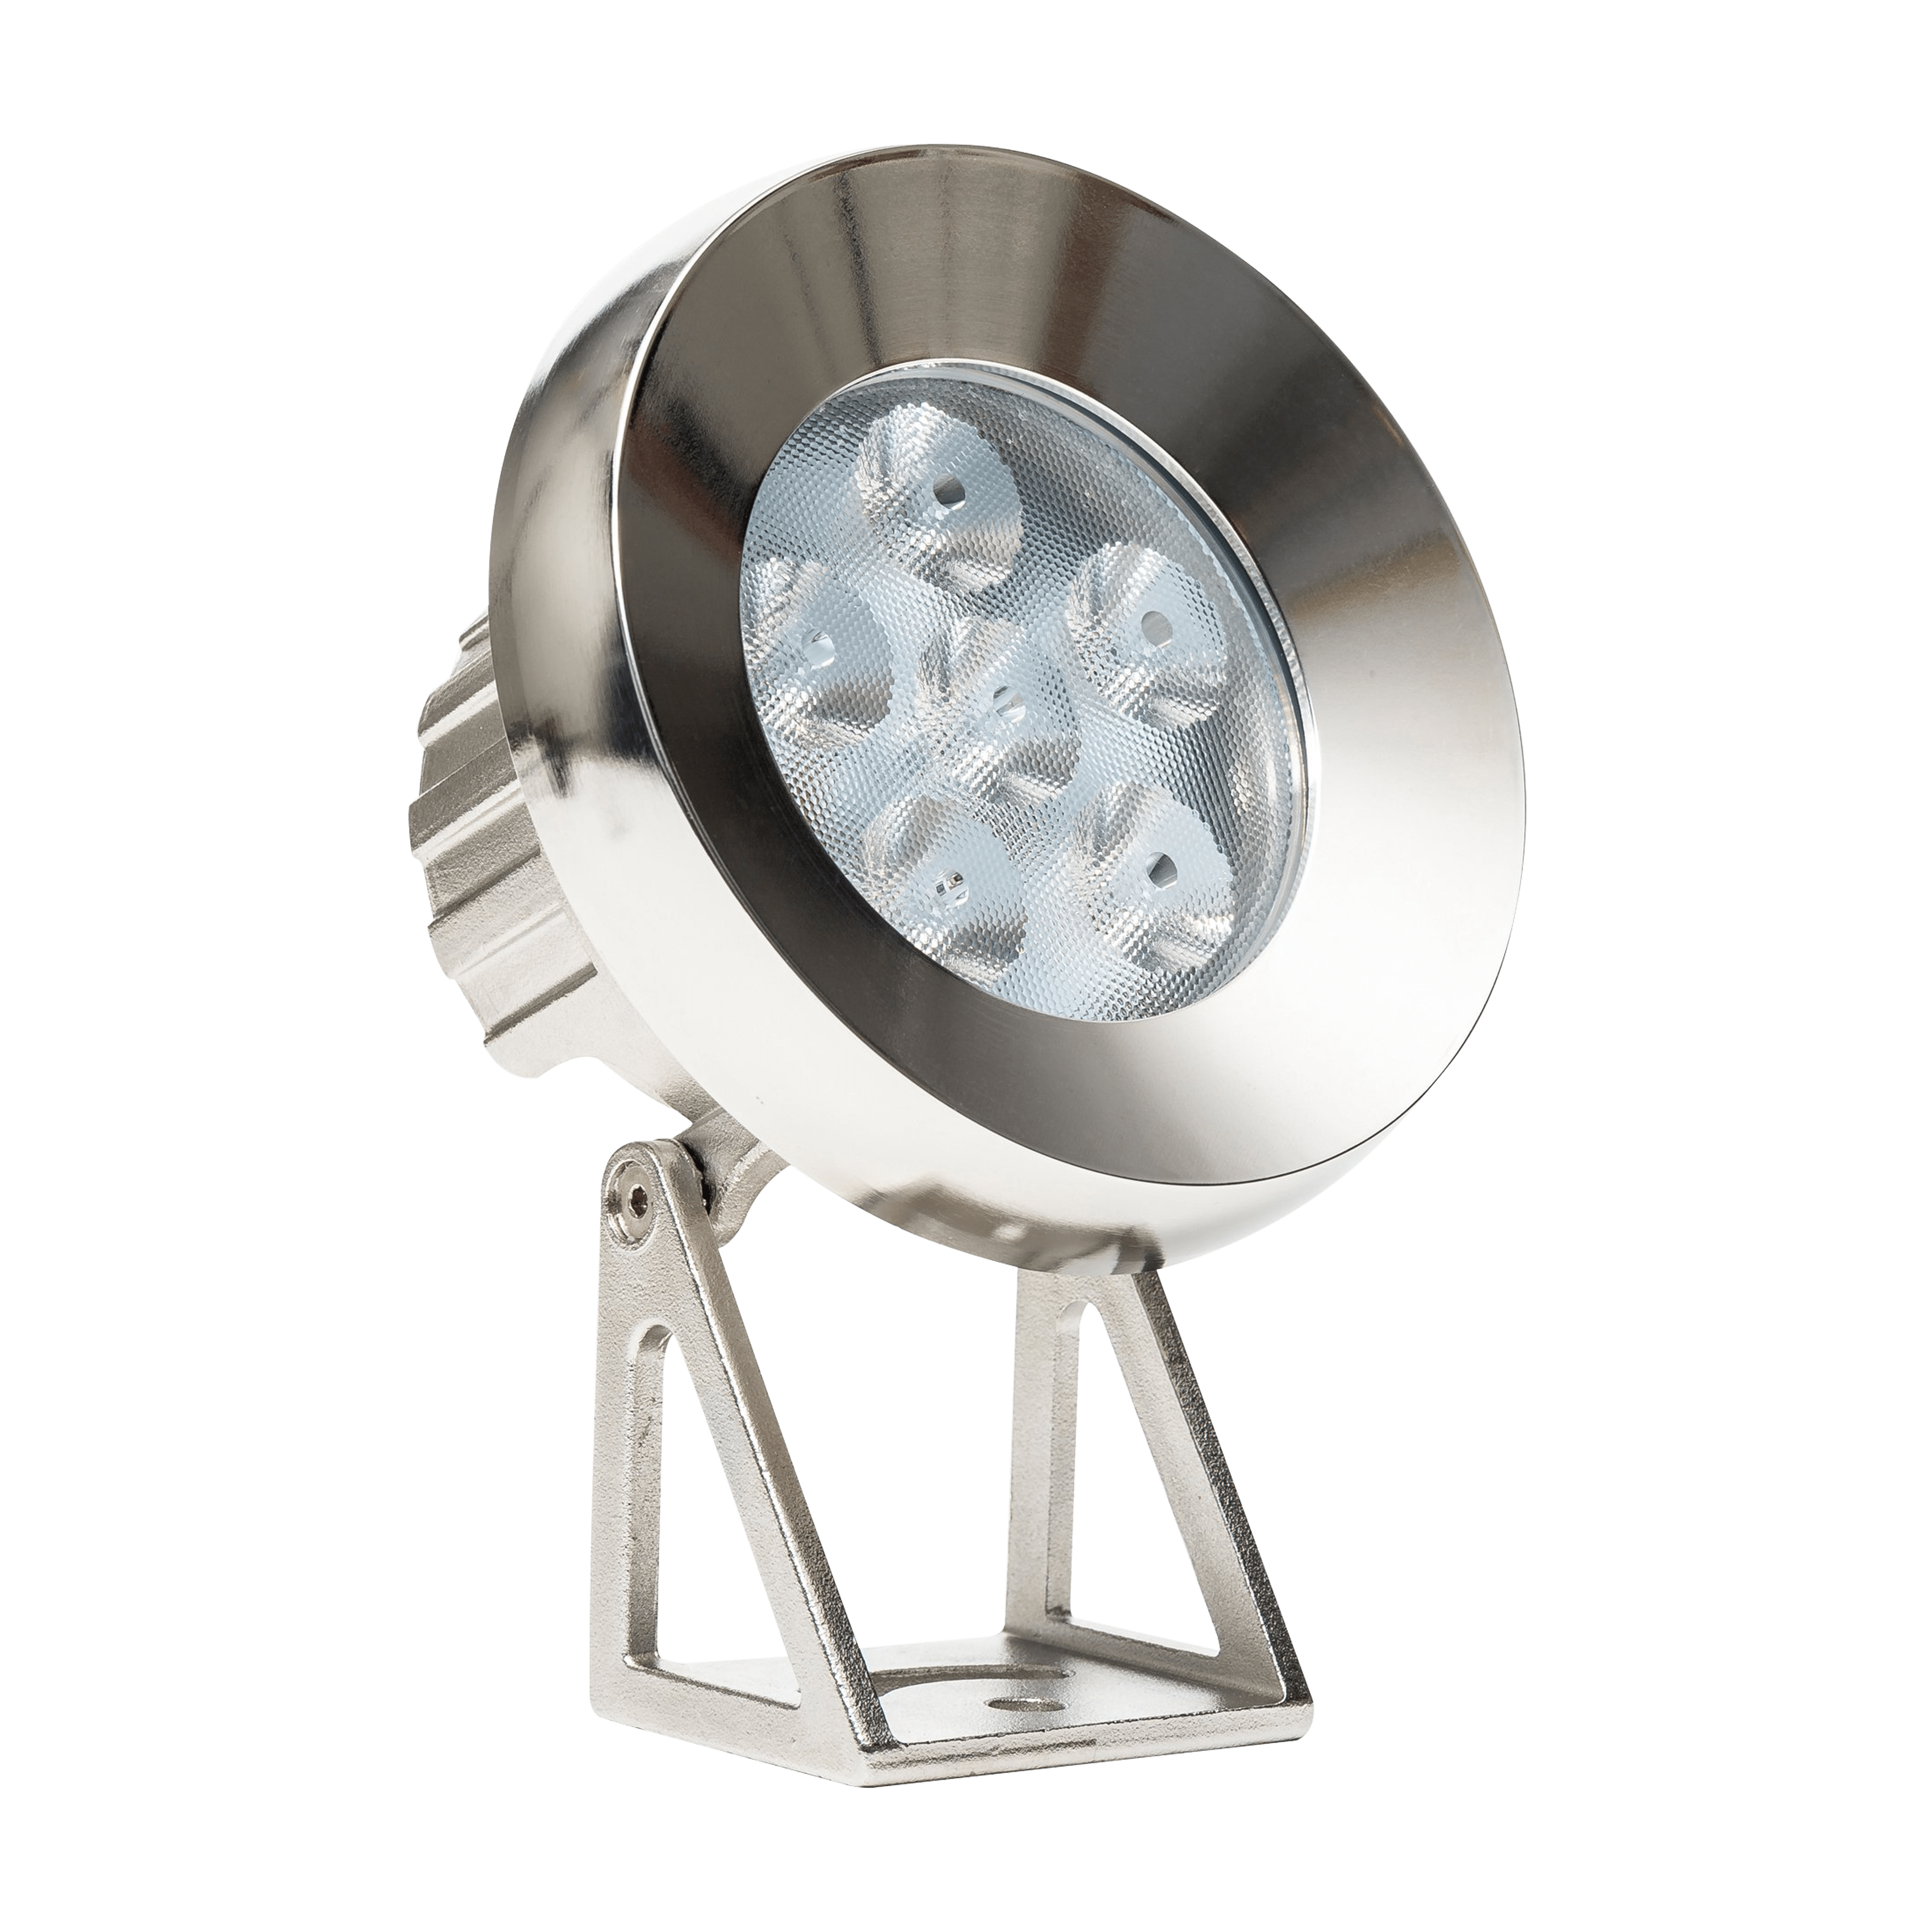 Sigatoka Electric Ltd - Sotto 316 Stainless Steel 15w LED Pond or Garden Light